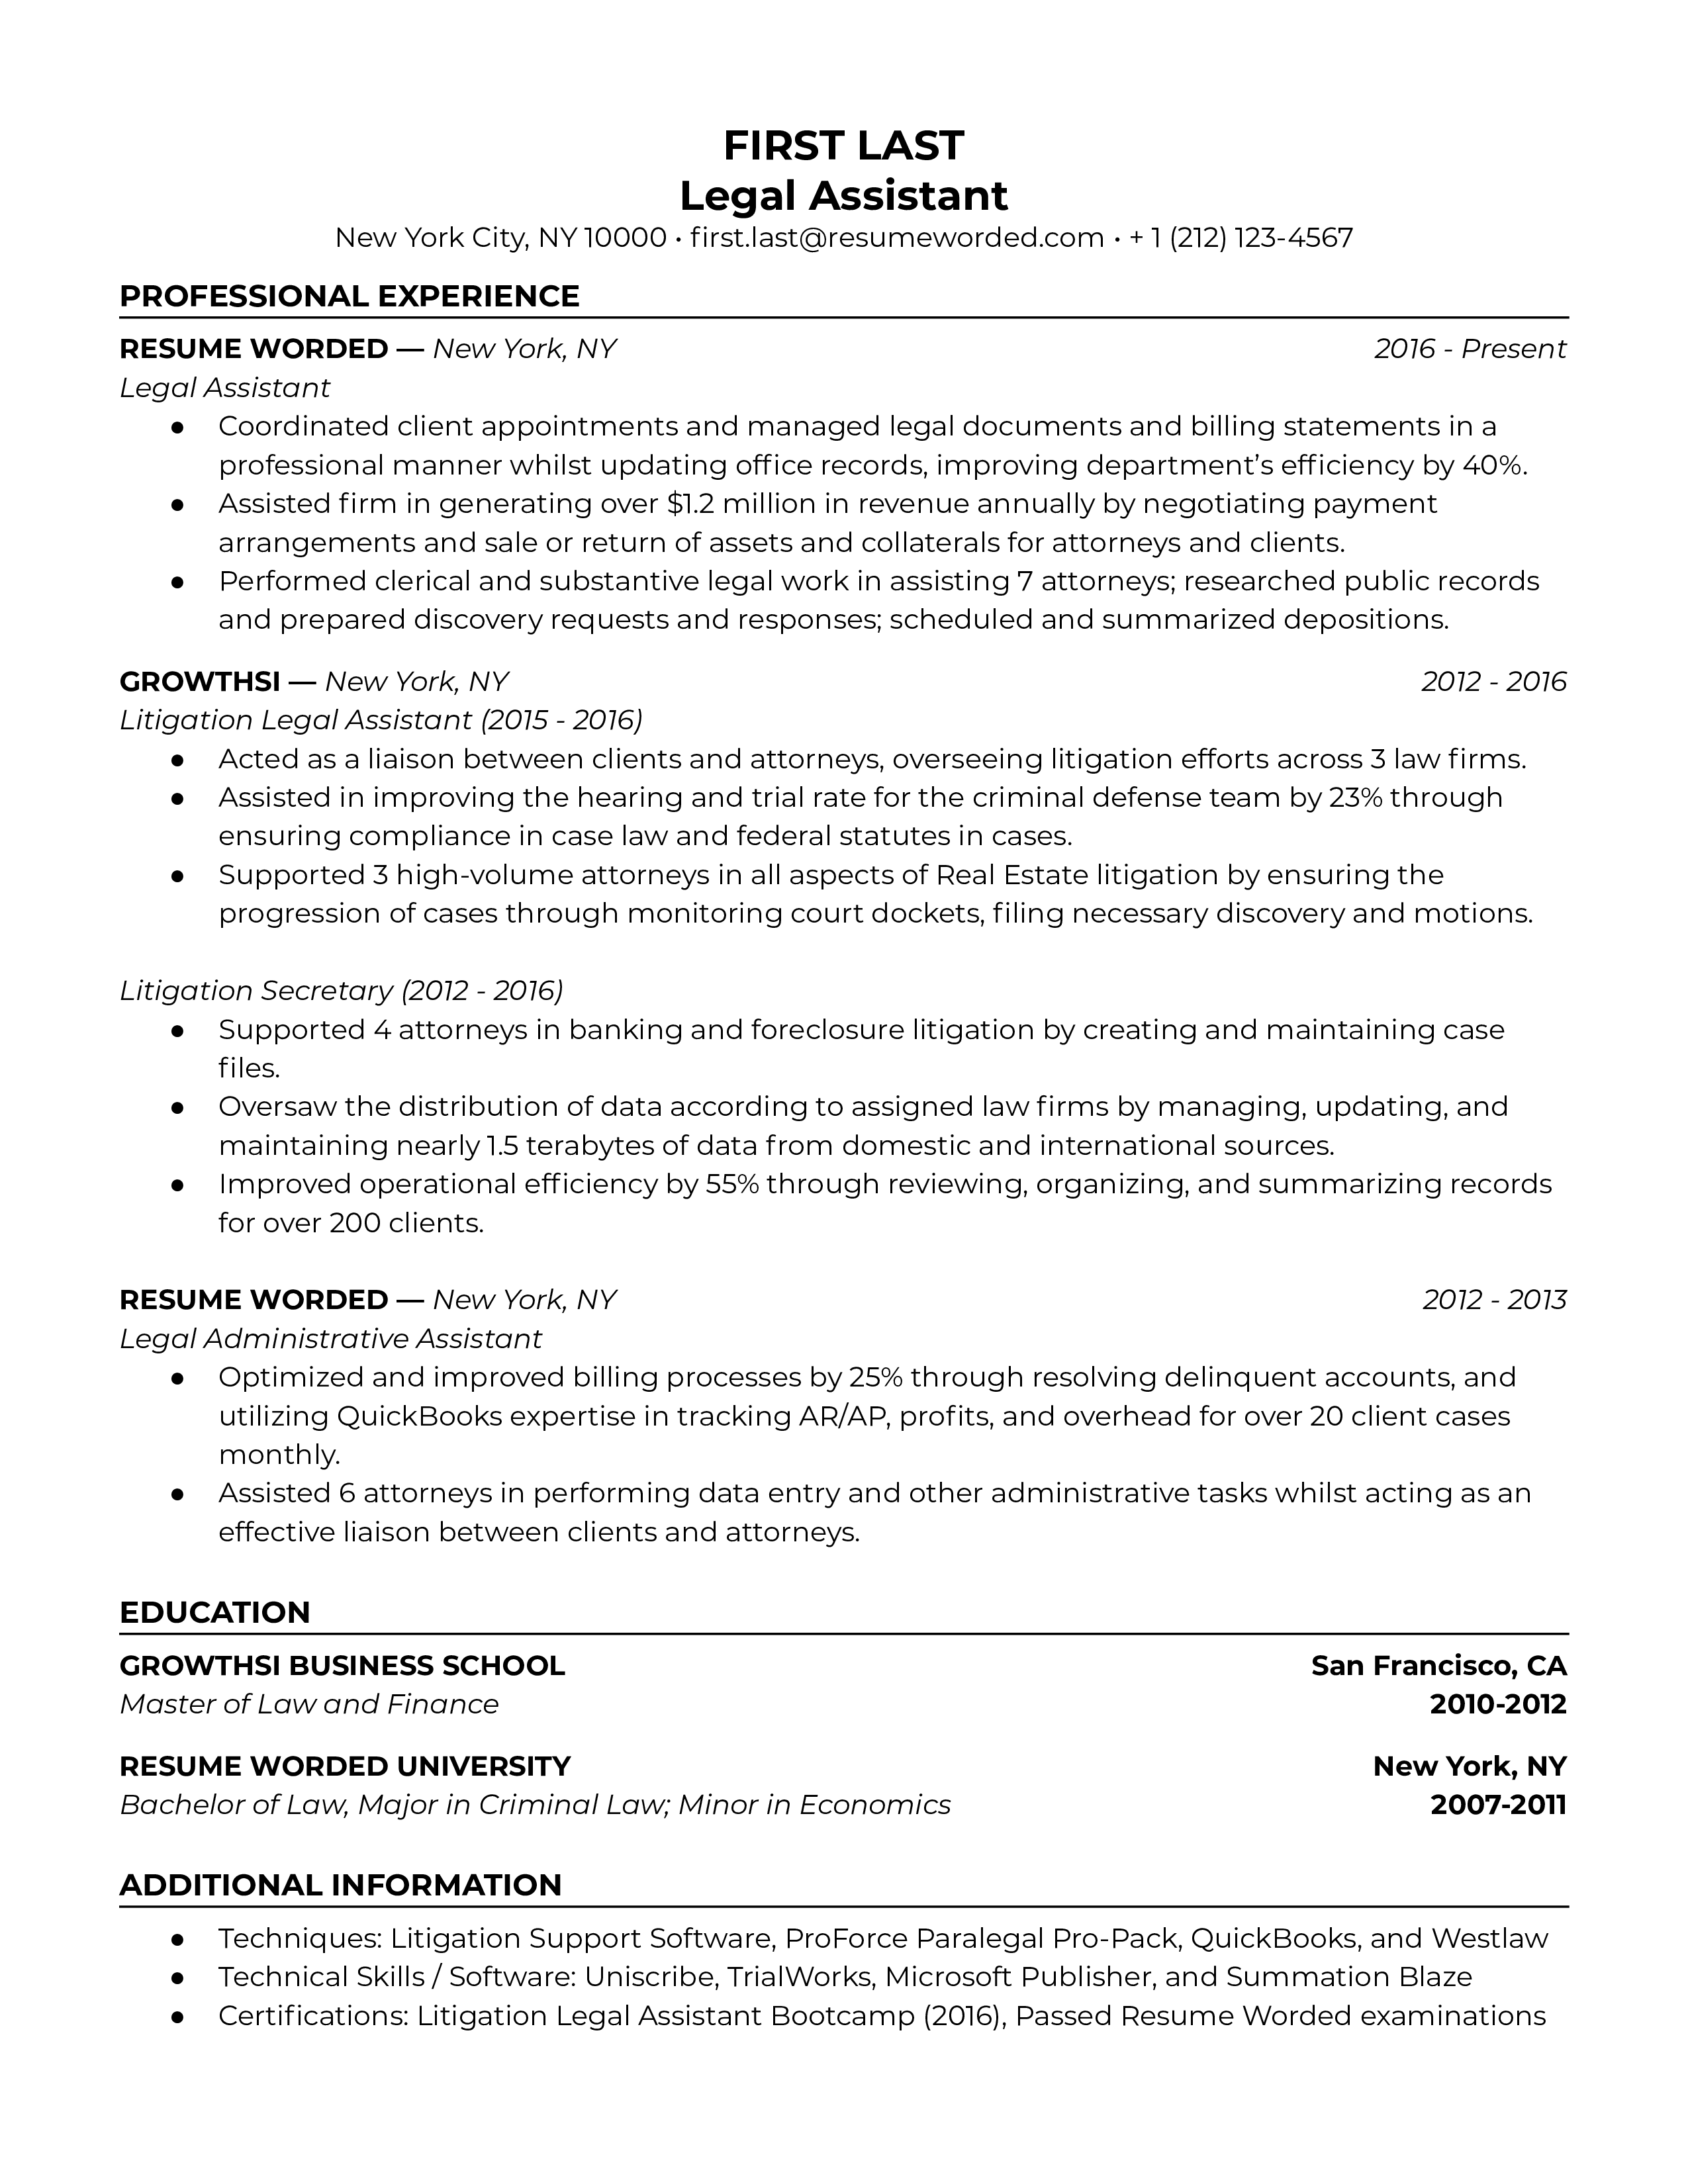 A CV screenshot for a Legal Assistant role focusing on legal software proficiency and experience with legal procedures and documents.